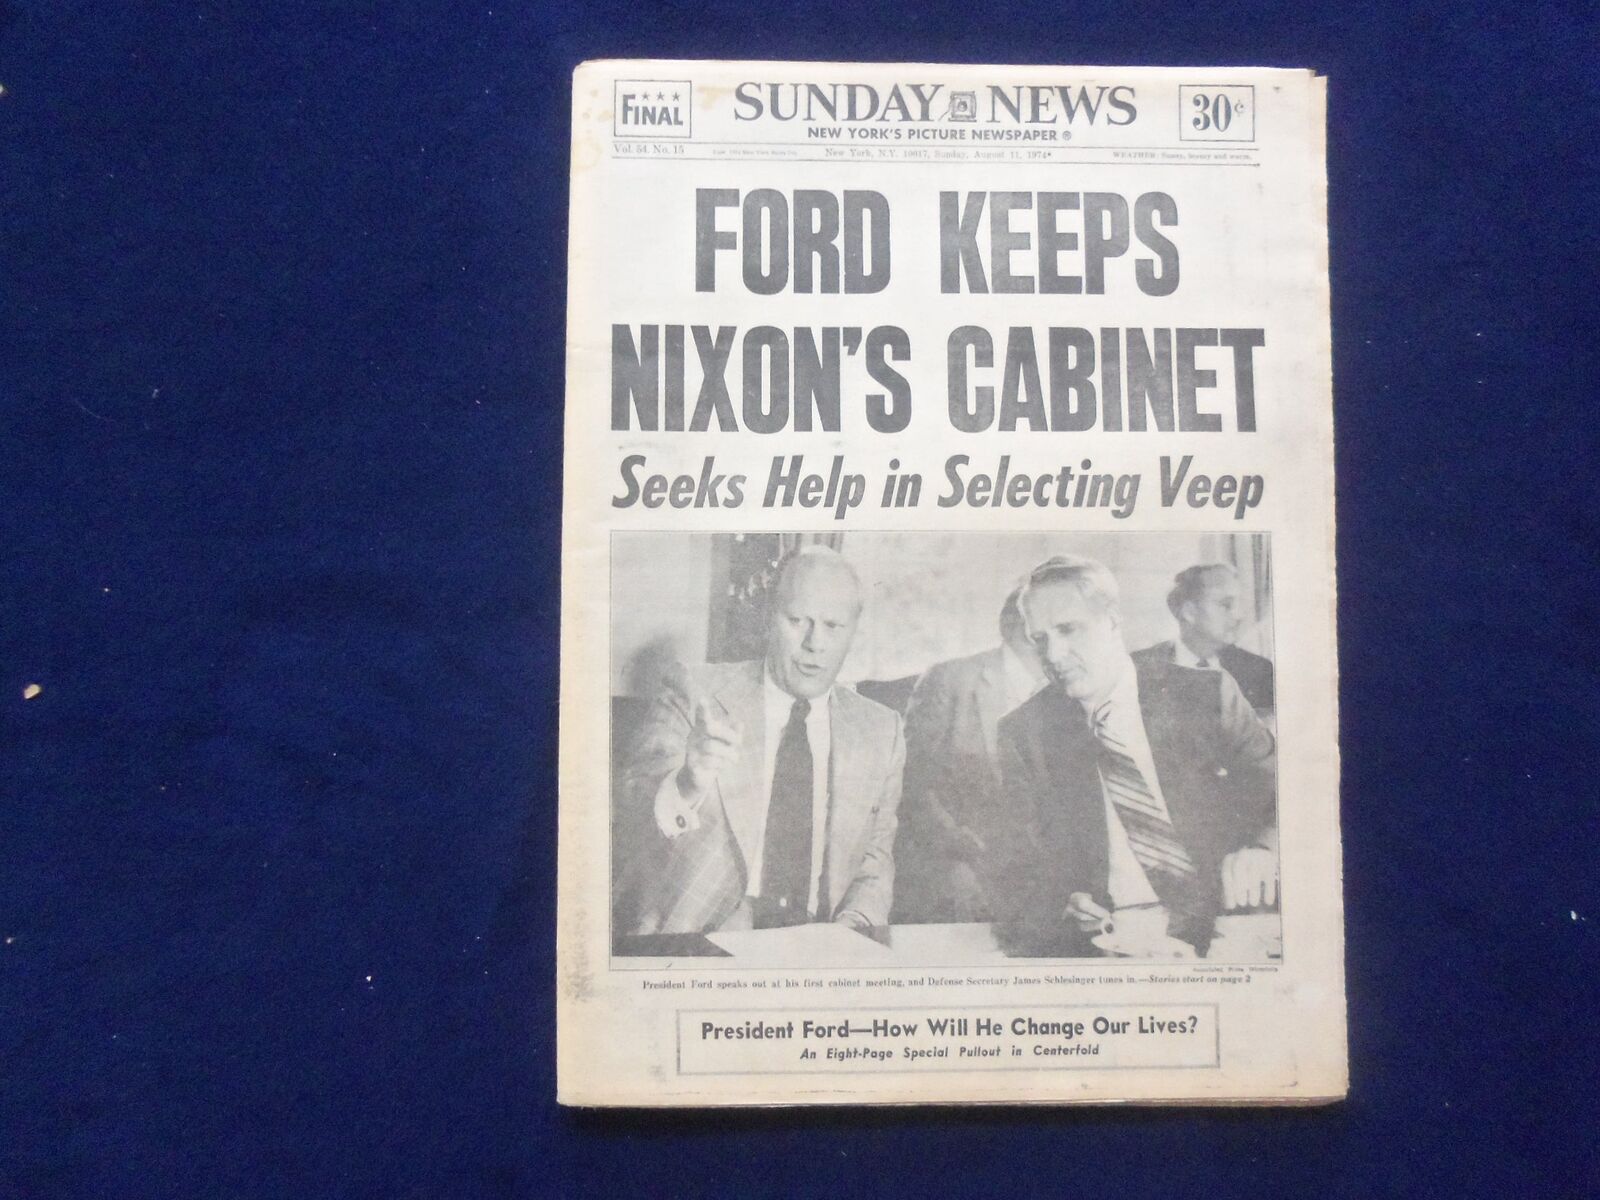 1974 AUG 11 NEW YORK DAILY NEWS NEWSPAPER - FORD KEEPS NIXON'S CABINET - NP 6451